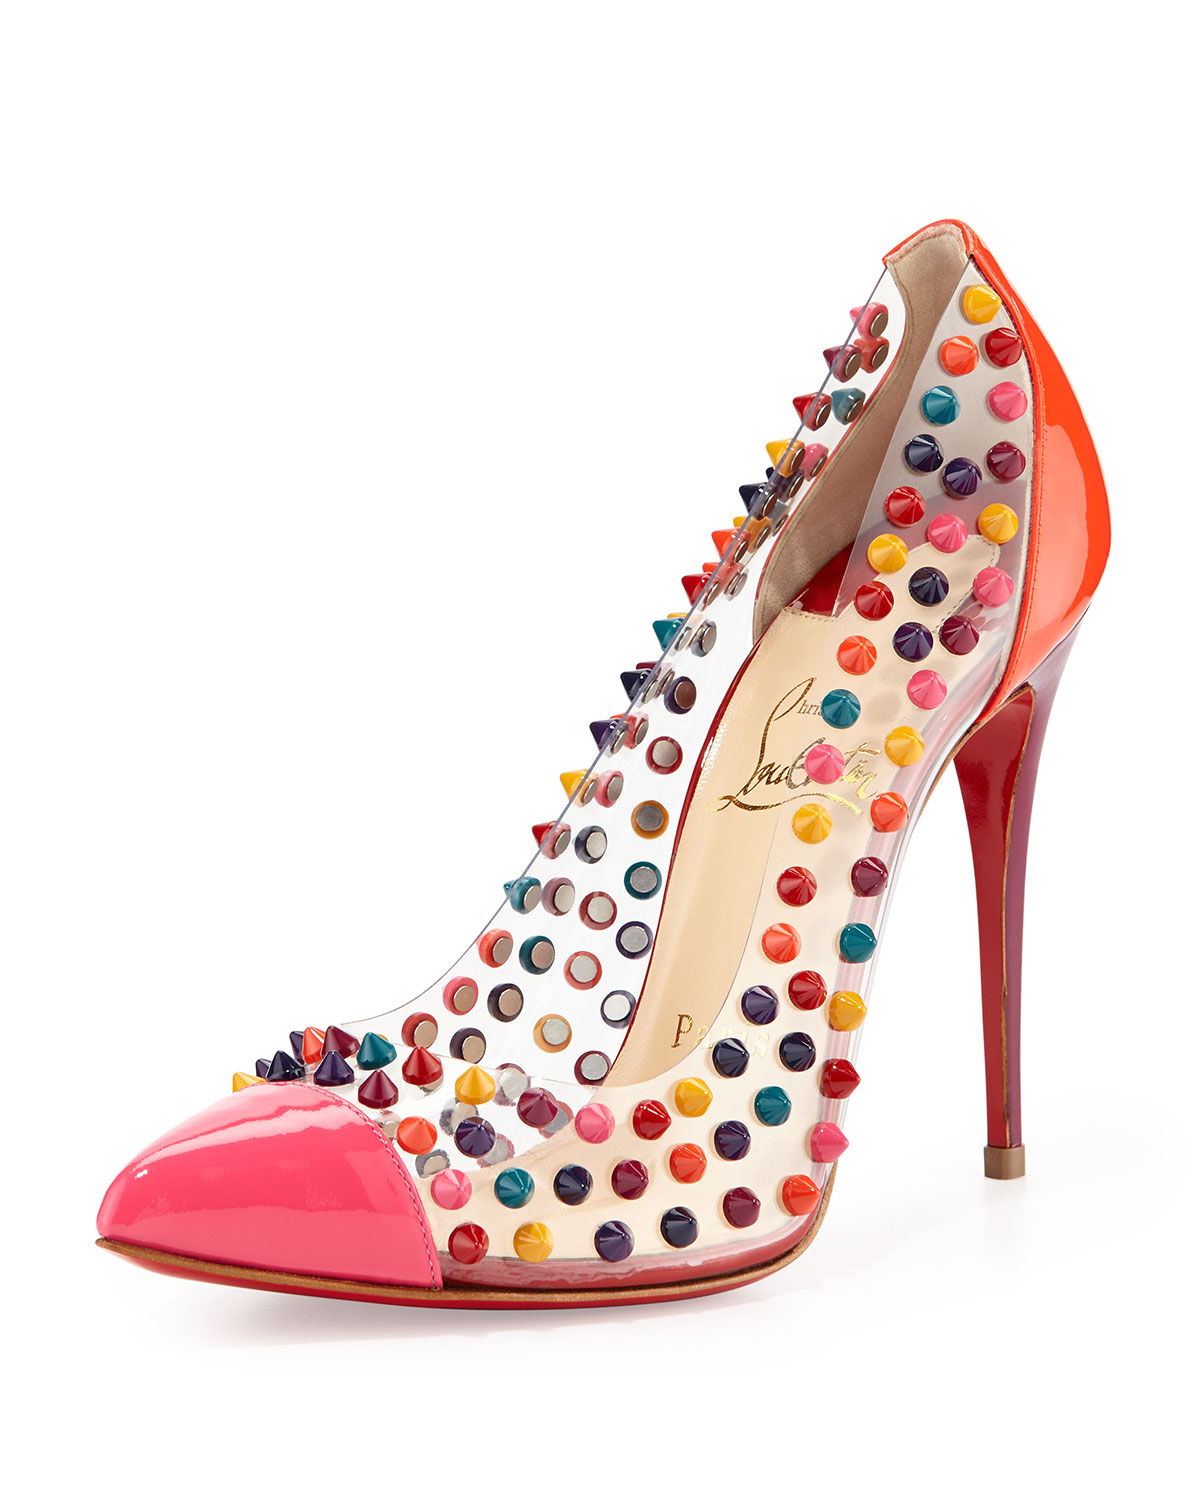 Lyst - Christian louboutin Spike Me Pvc Cap-Toe Red Sole Pump in Pink